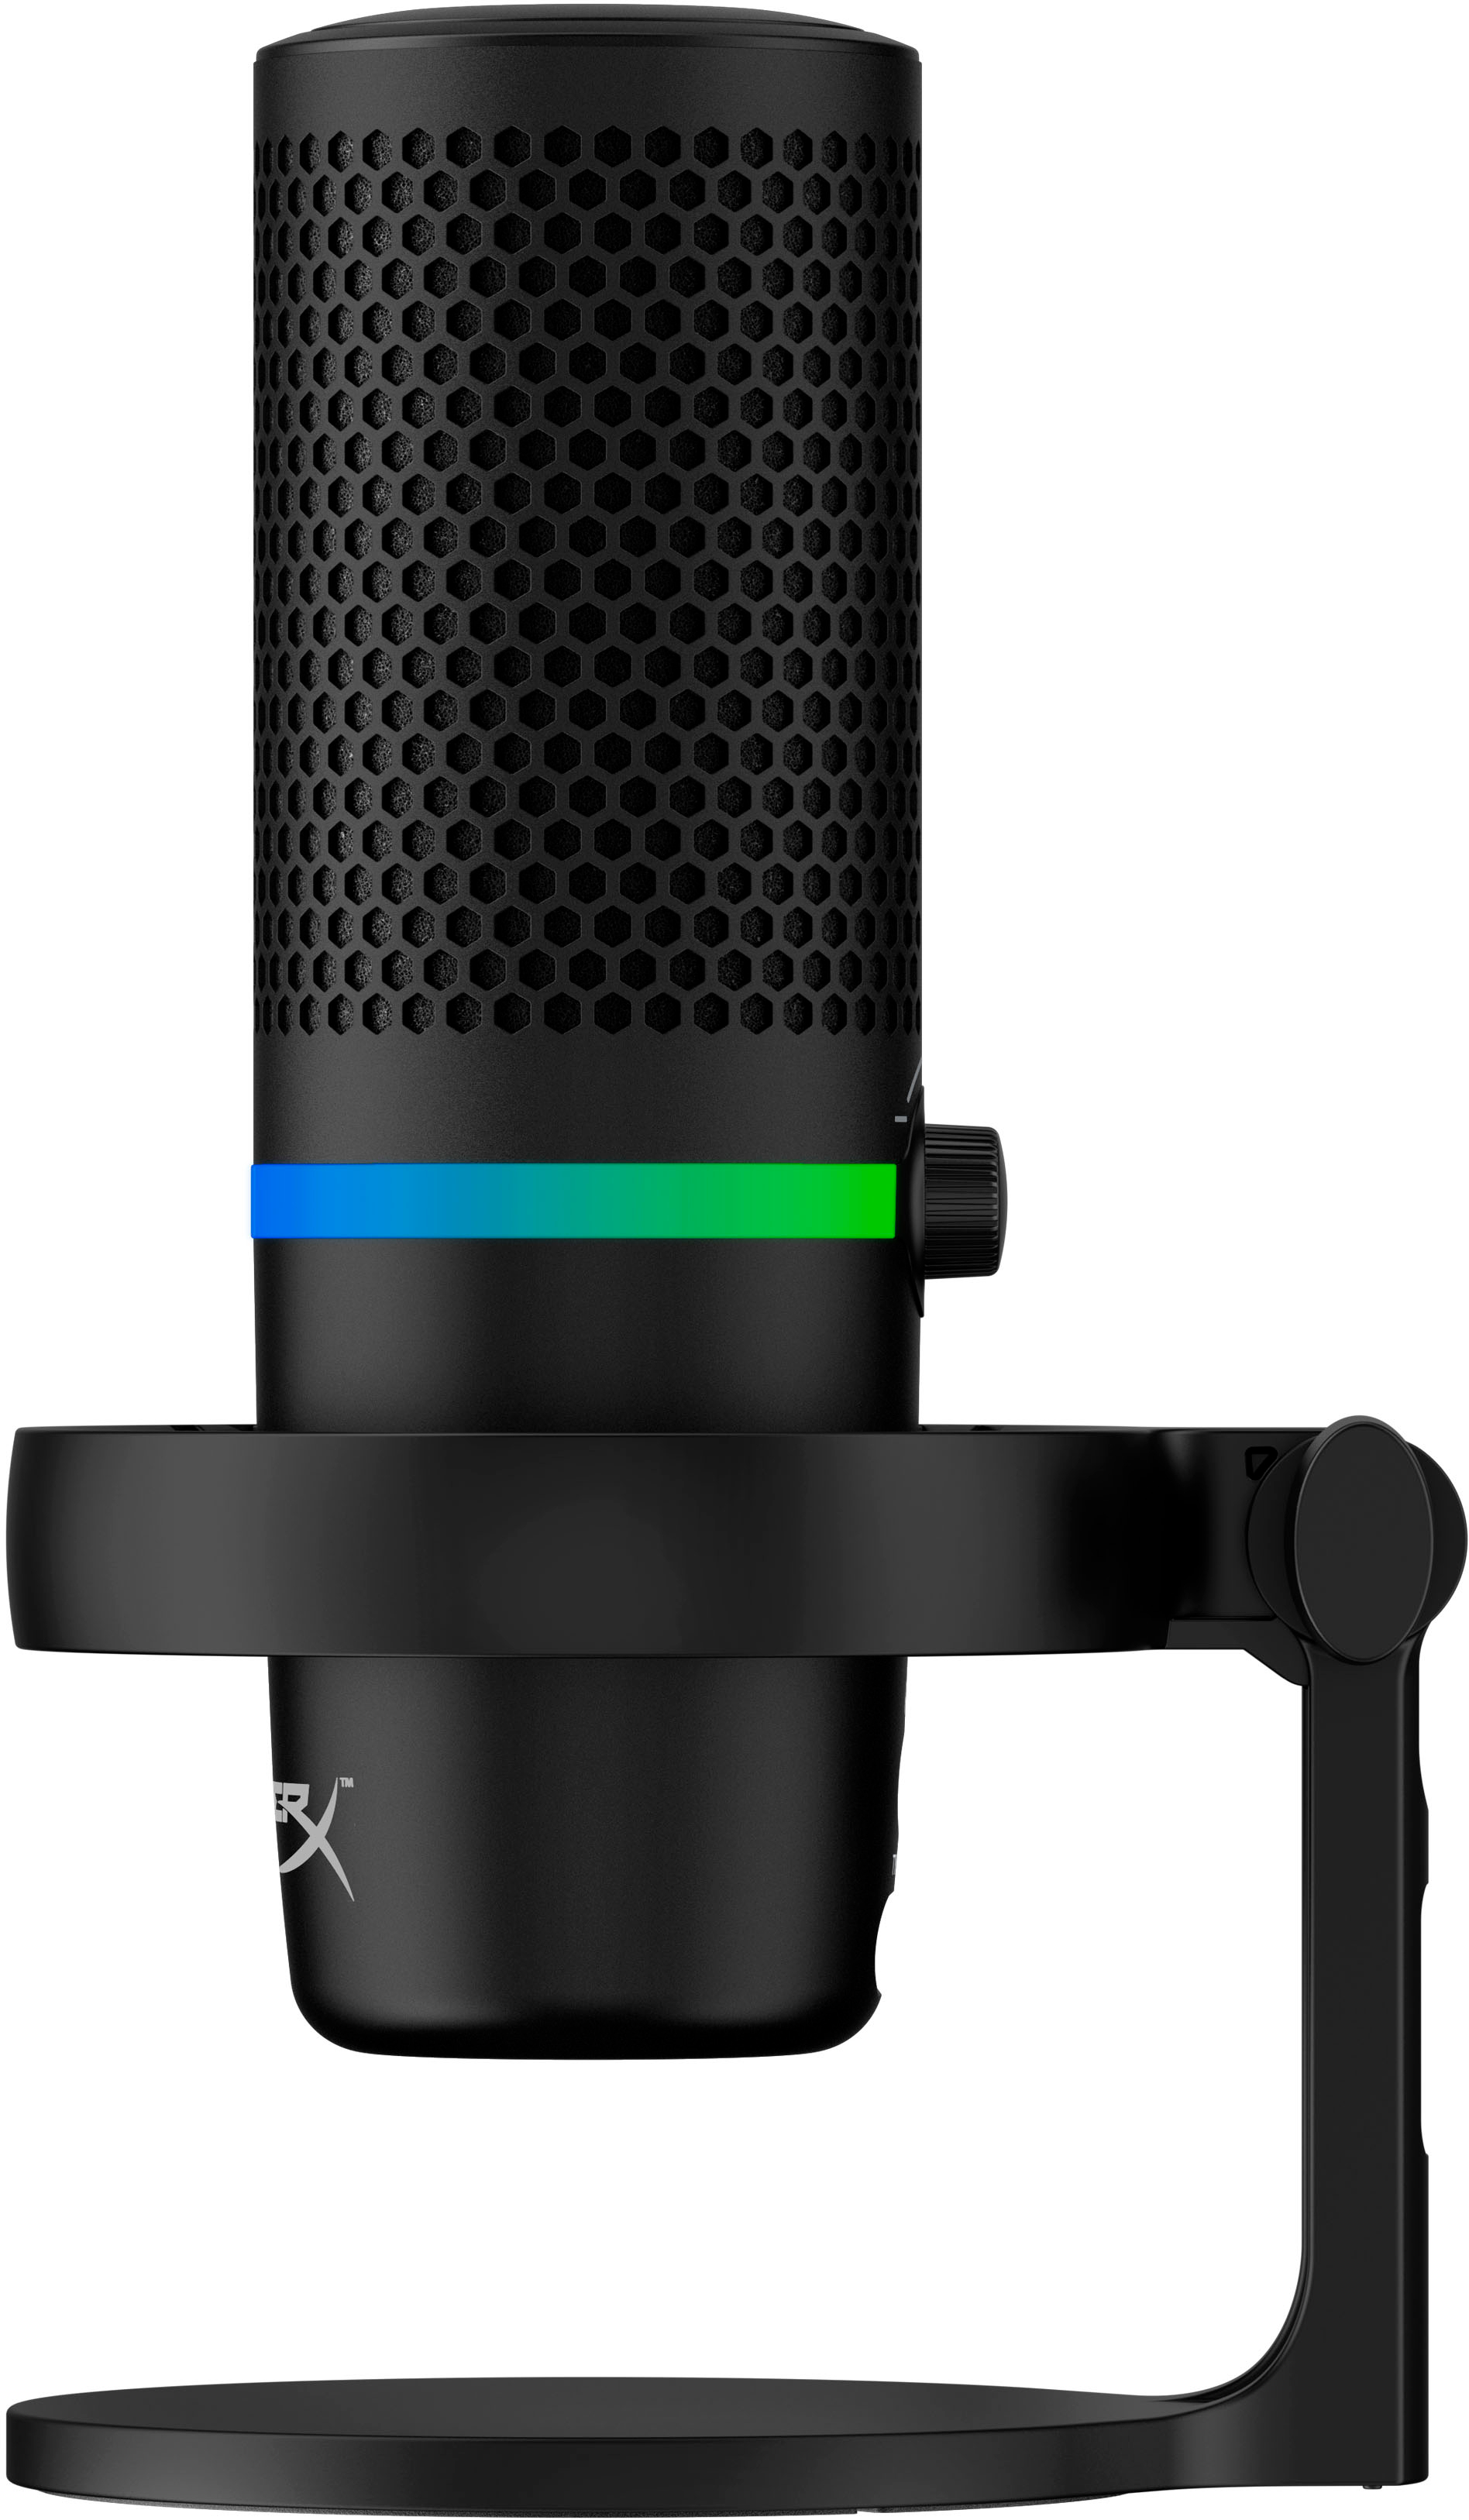 Angle View: HyperX - Duocast Wired Cardioid Omnidirectional USB Condenser Microphone